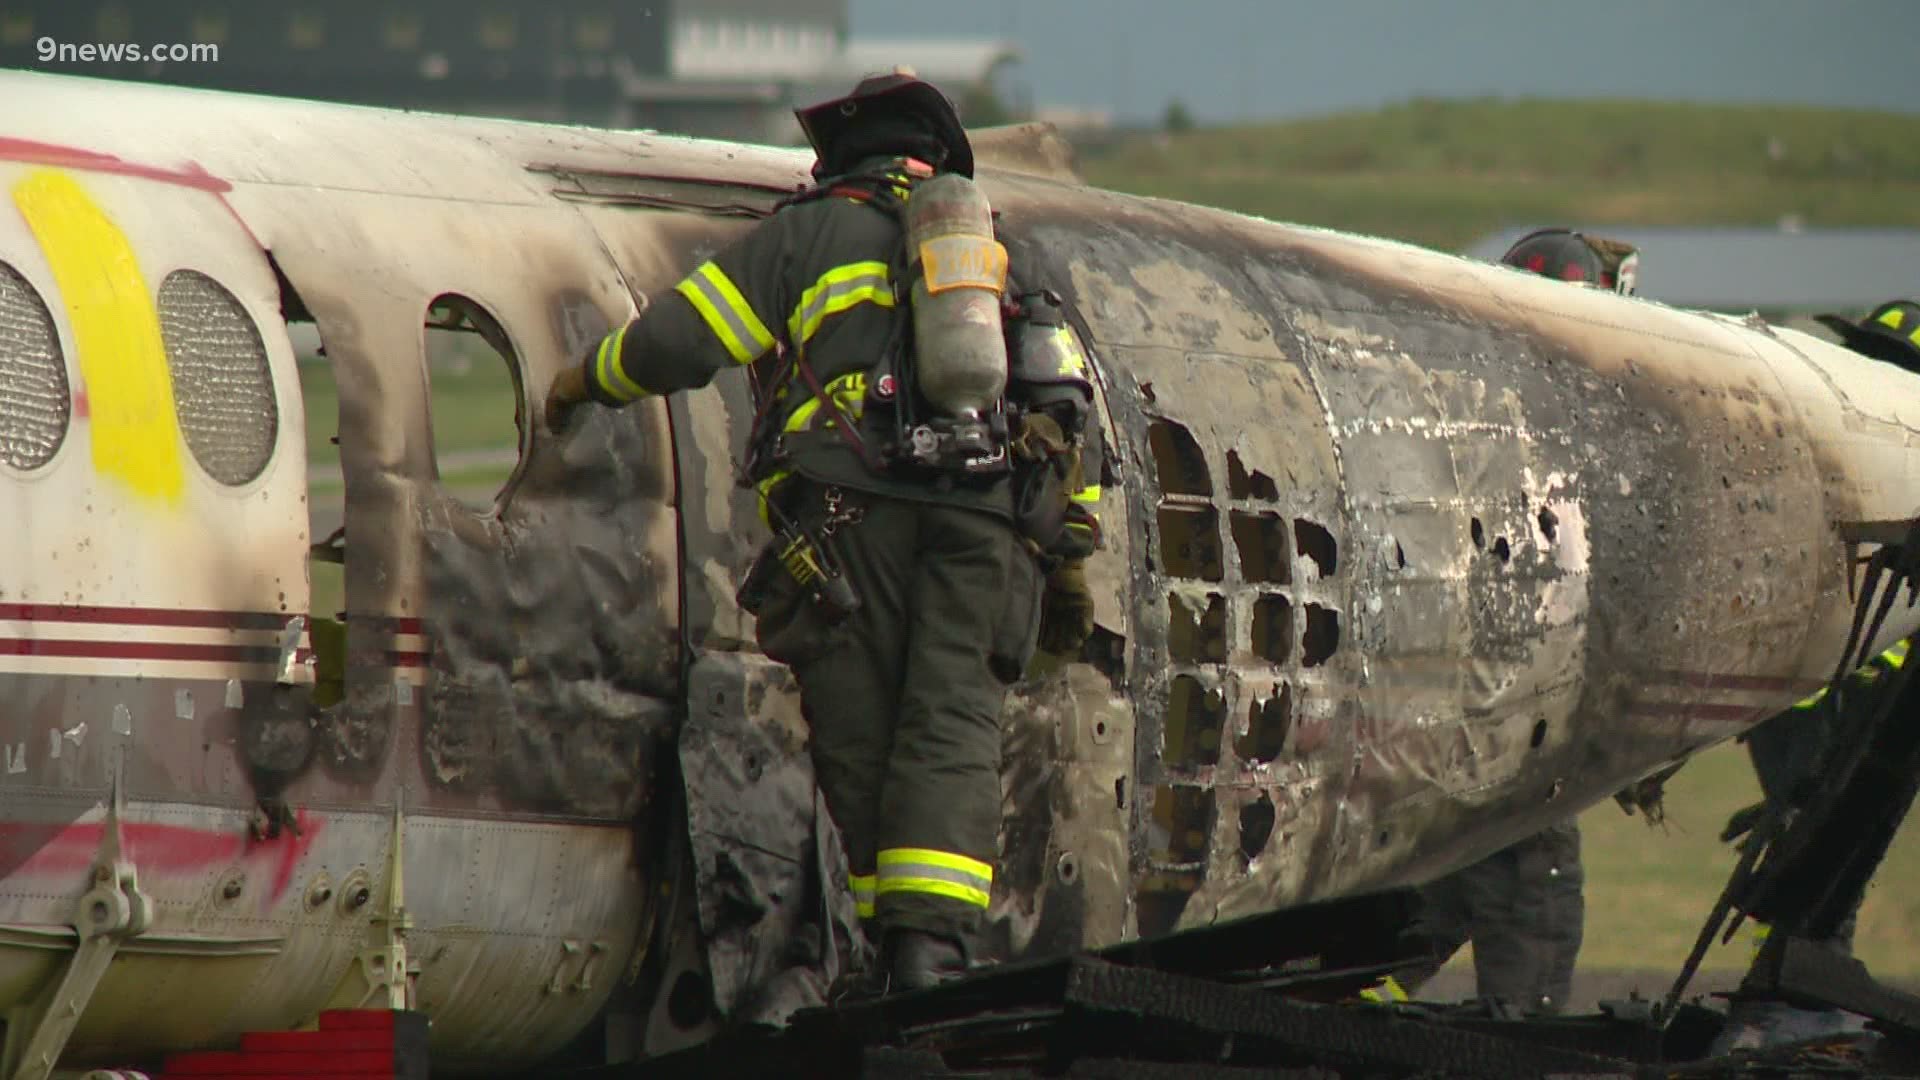 South Metro firefighters got some practice dealing with a worst-case scenario at Centennial Airport Friday.